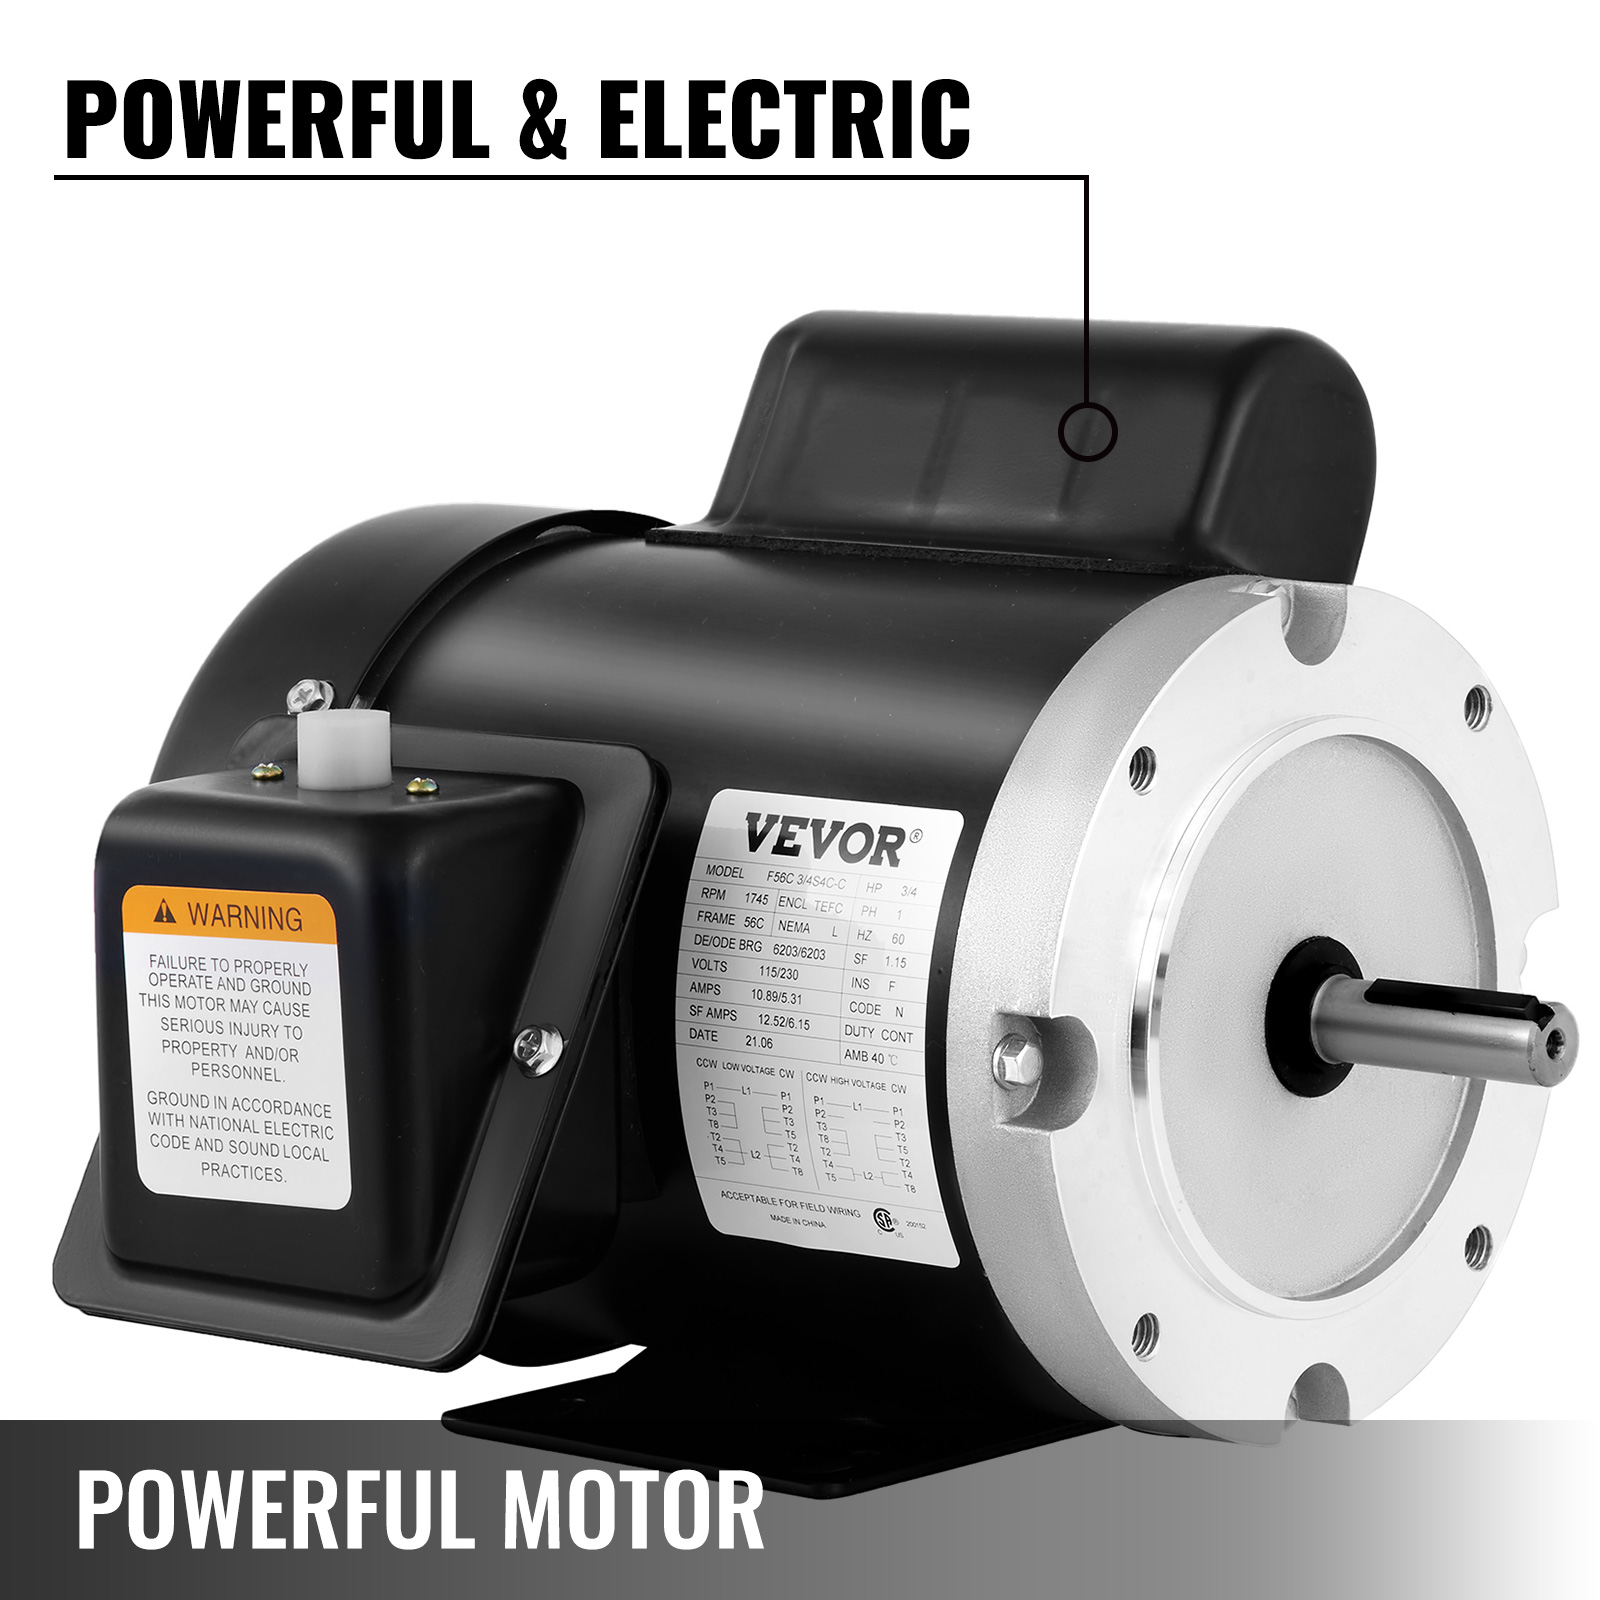 VEVOR Electric Compressor Motor, 3/4 HP, Rated Speed 1725 RPM Single Phase  Electric Motor, AC 115V 230V Air Compressor Motor, Suitable for  Agricultural Machinery and General Equipment VEVOR US